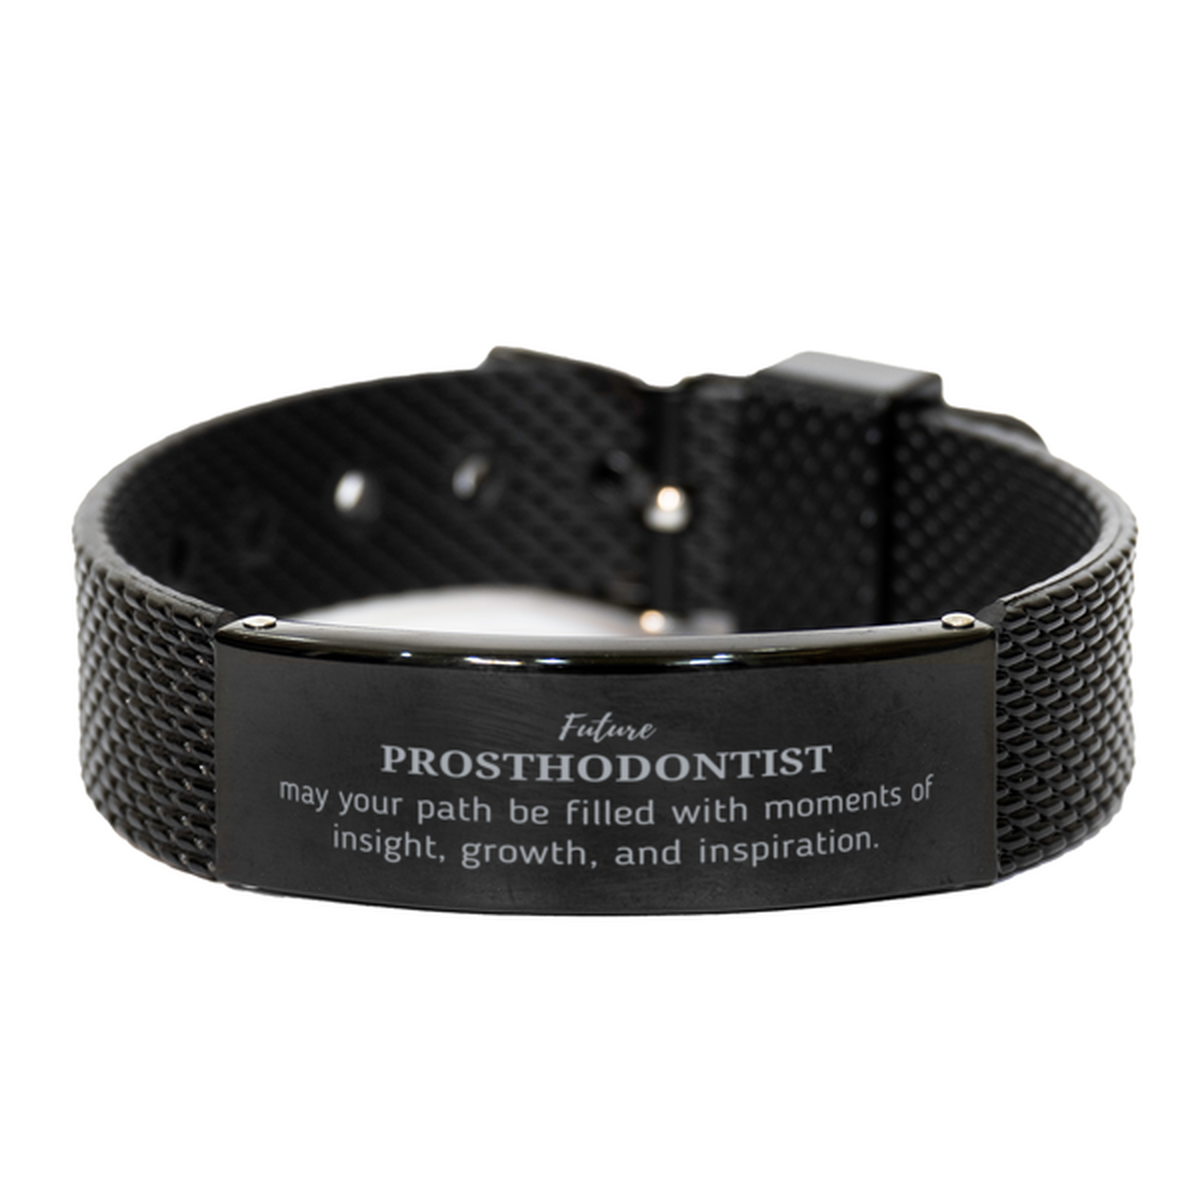 Future Prosthodontist Gifts, May your path be filled with moments of insight, Graduation Gifts for New Prosthodontist, Christmas Unique Black Shark Mesh Bracelet For Men, Women, Friends